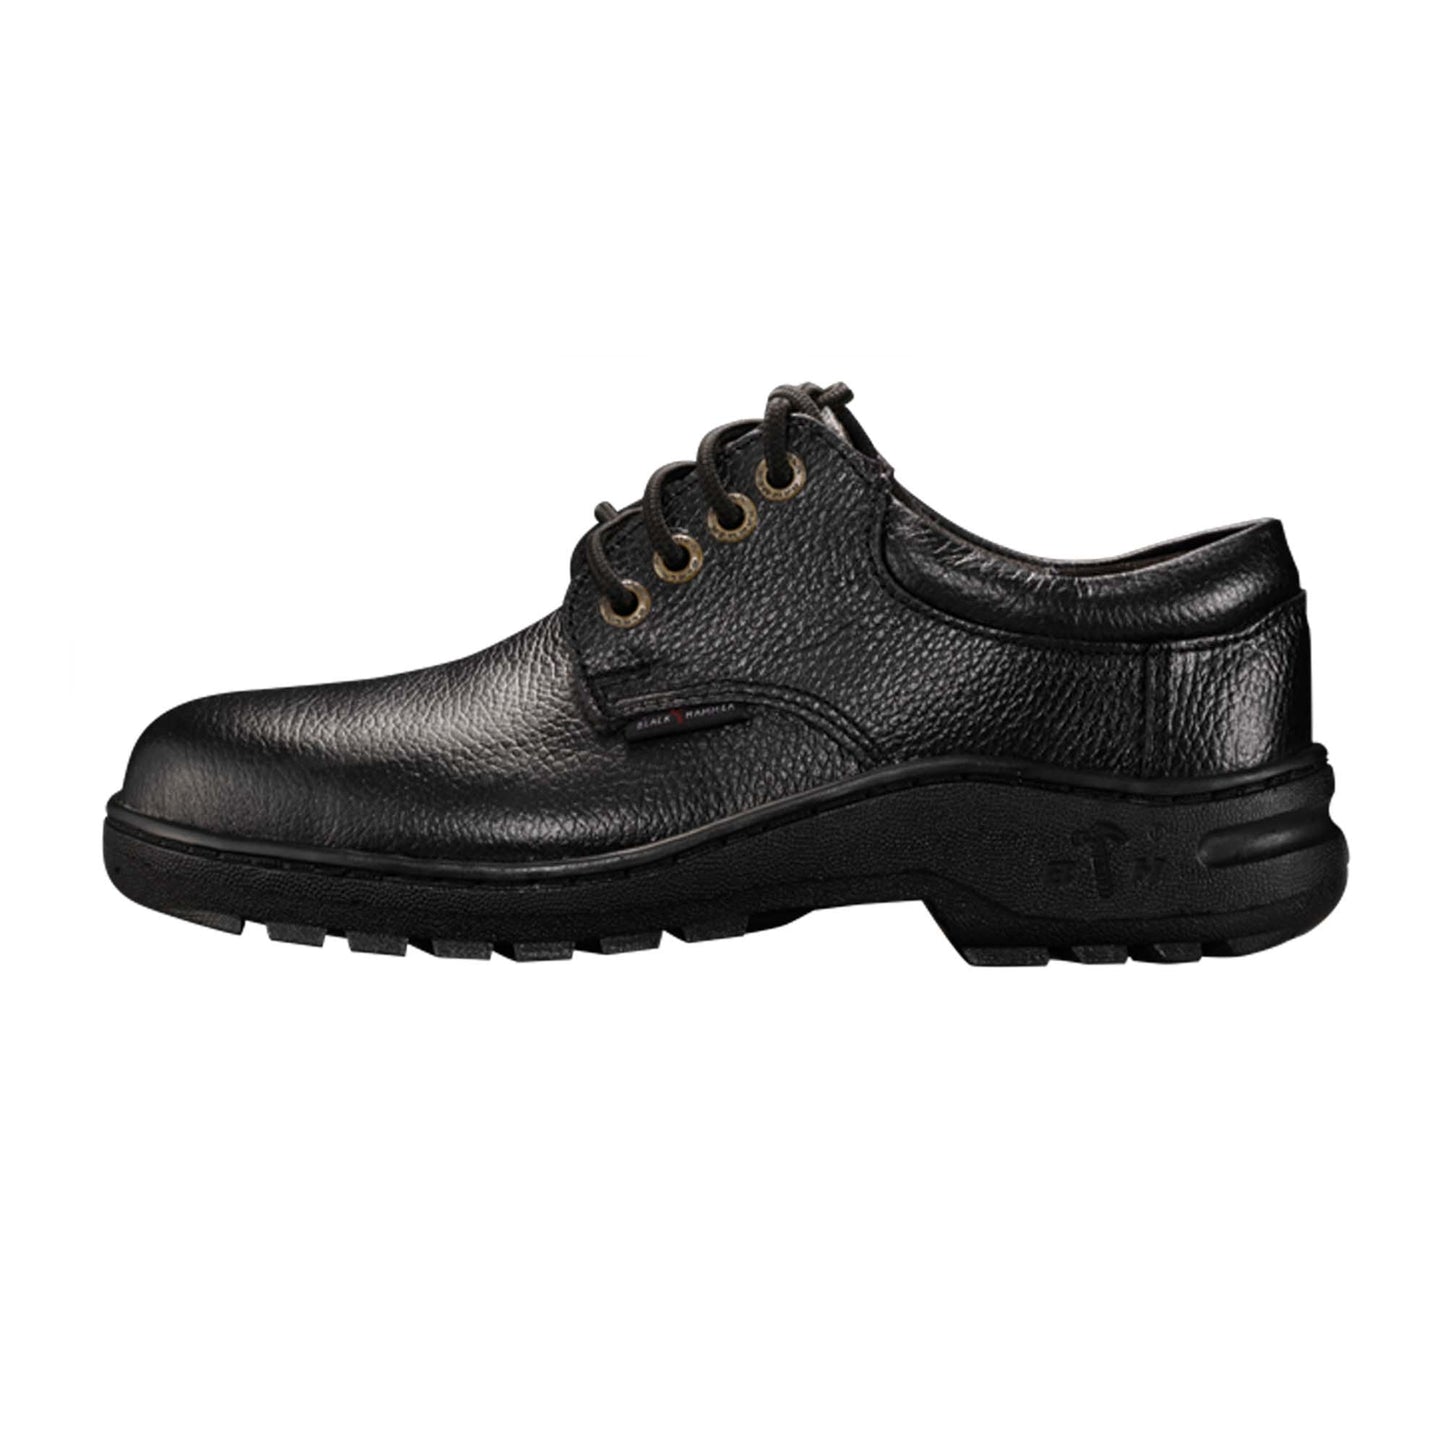 BH2331 Black & Lace up & Low cut Black Hammer  Men Safety Shoes,SIRIM & DOSH APPROVED,Black Hammer Safety Shoes Malaysia, Oil resistant & durable rubber outsole